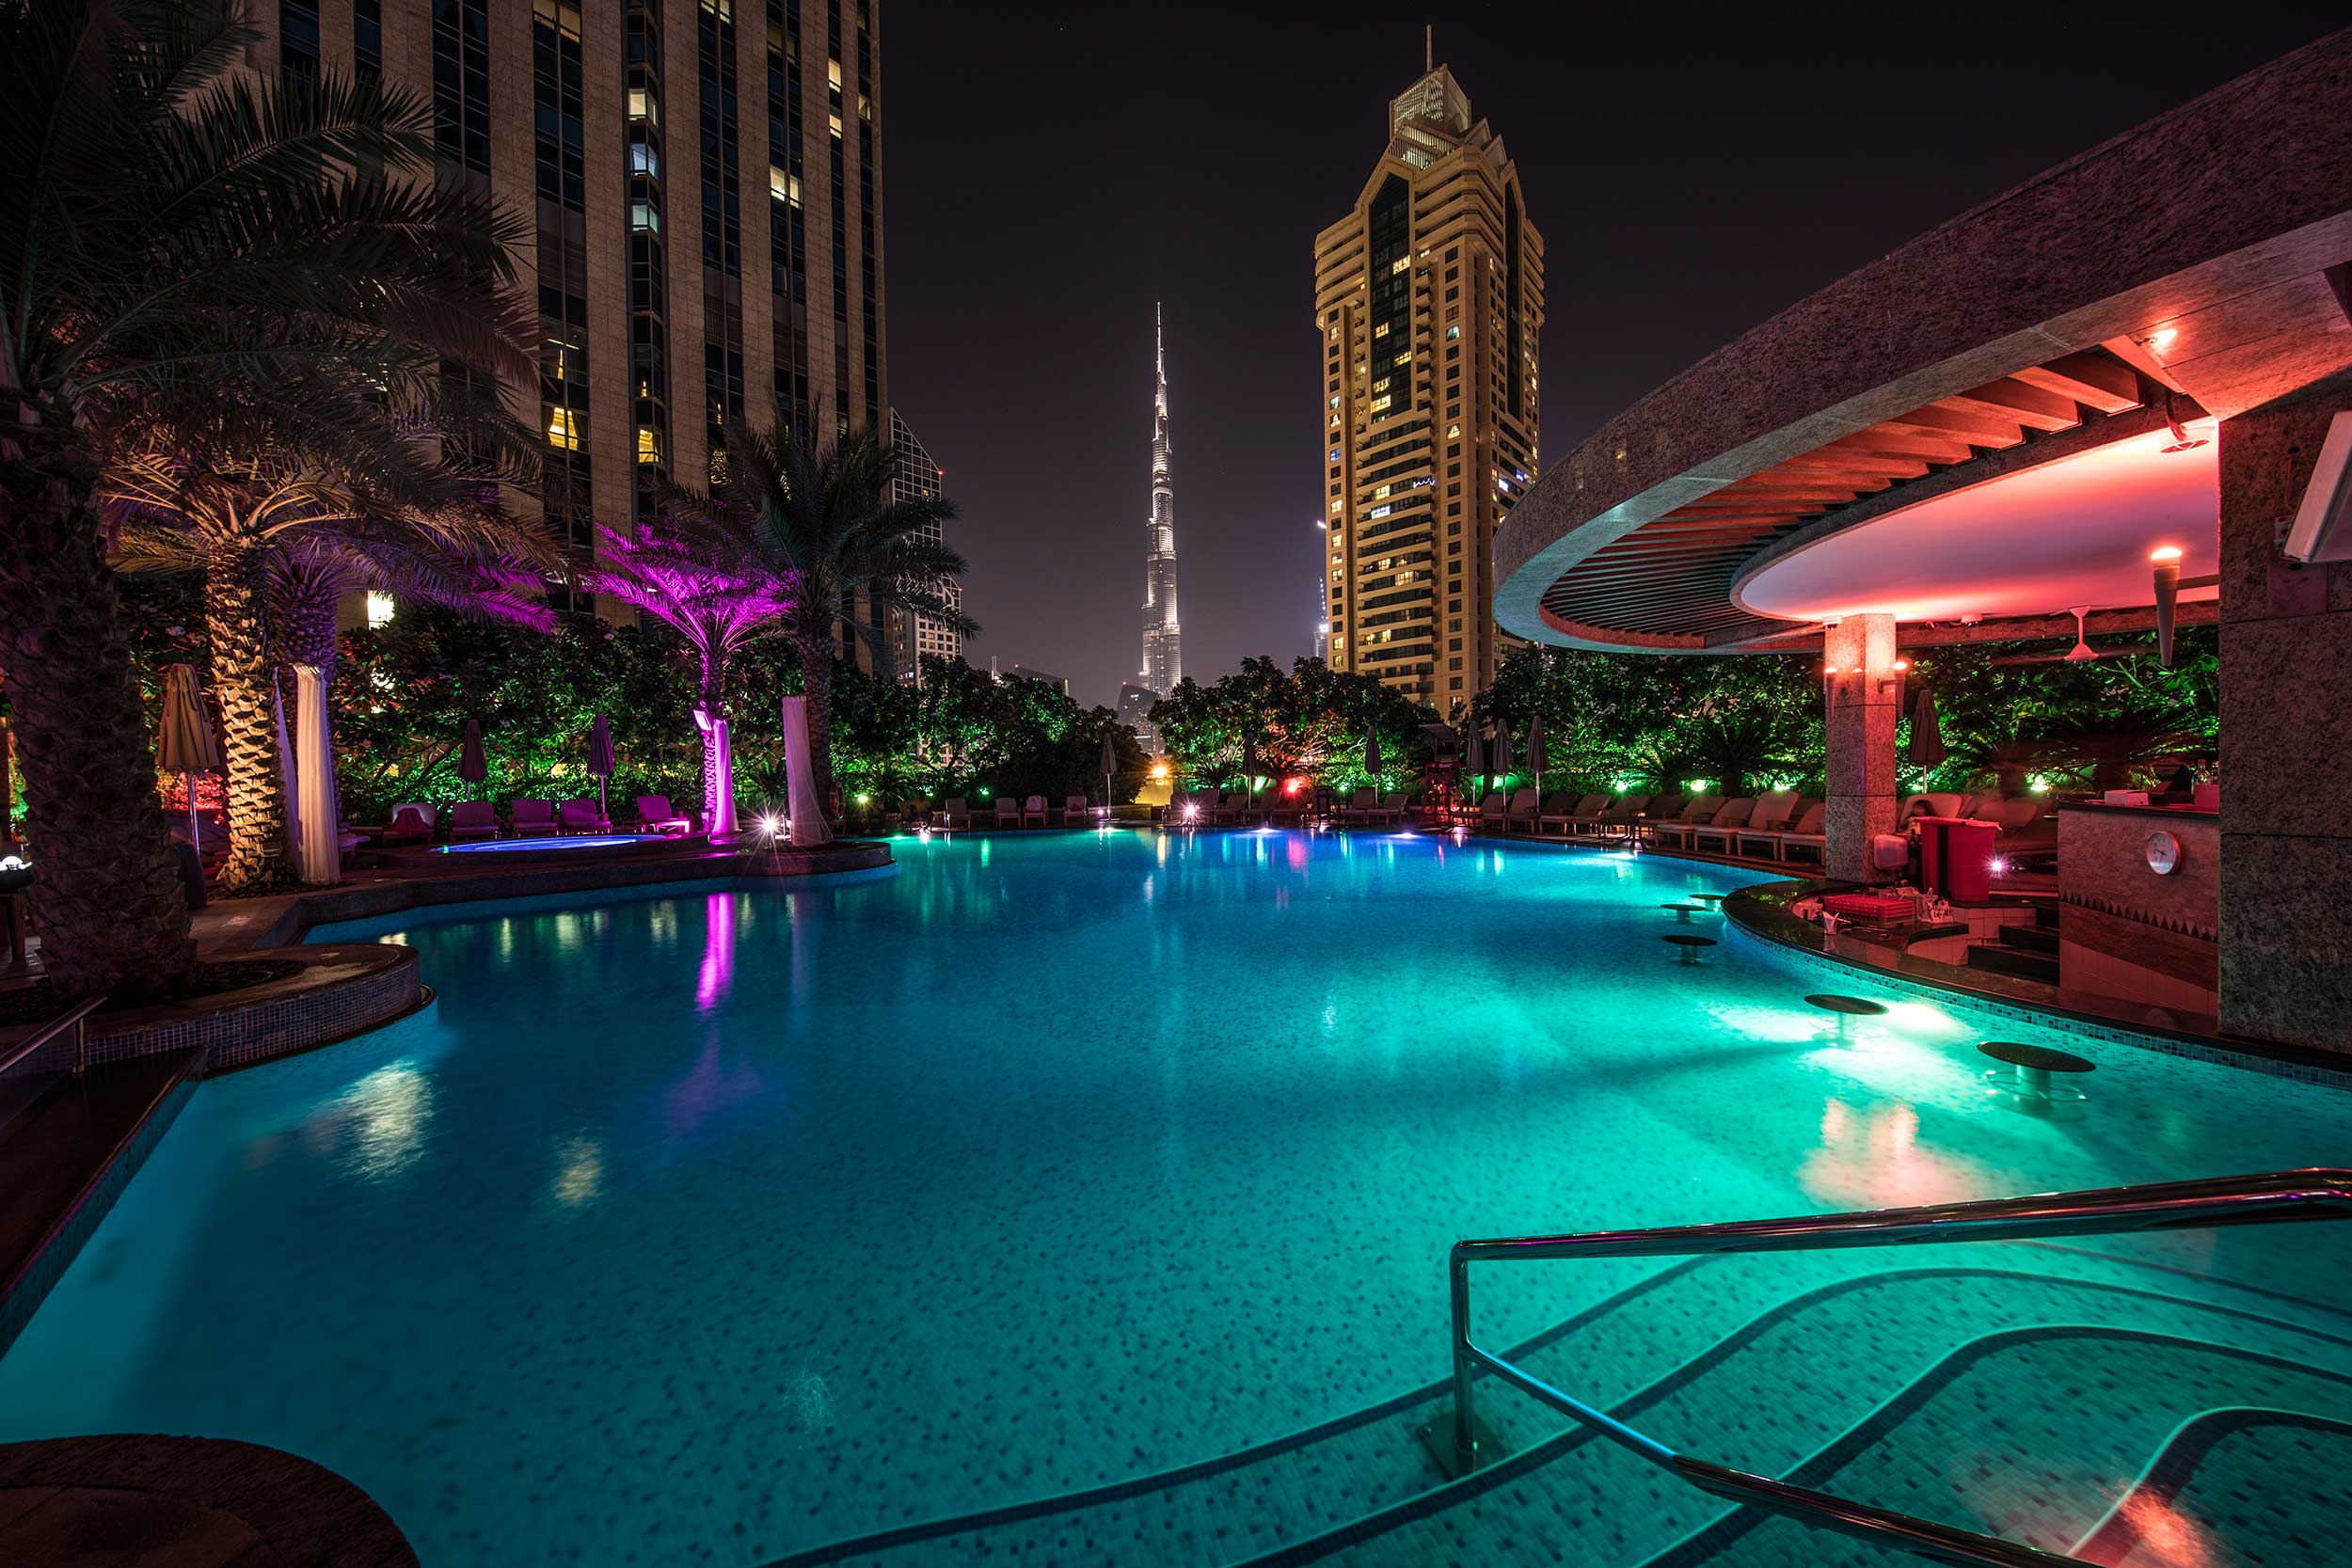 Multi-coloured lights streaming across a swimming pool at night with the lighted skyscrapers of dubai in the background